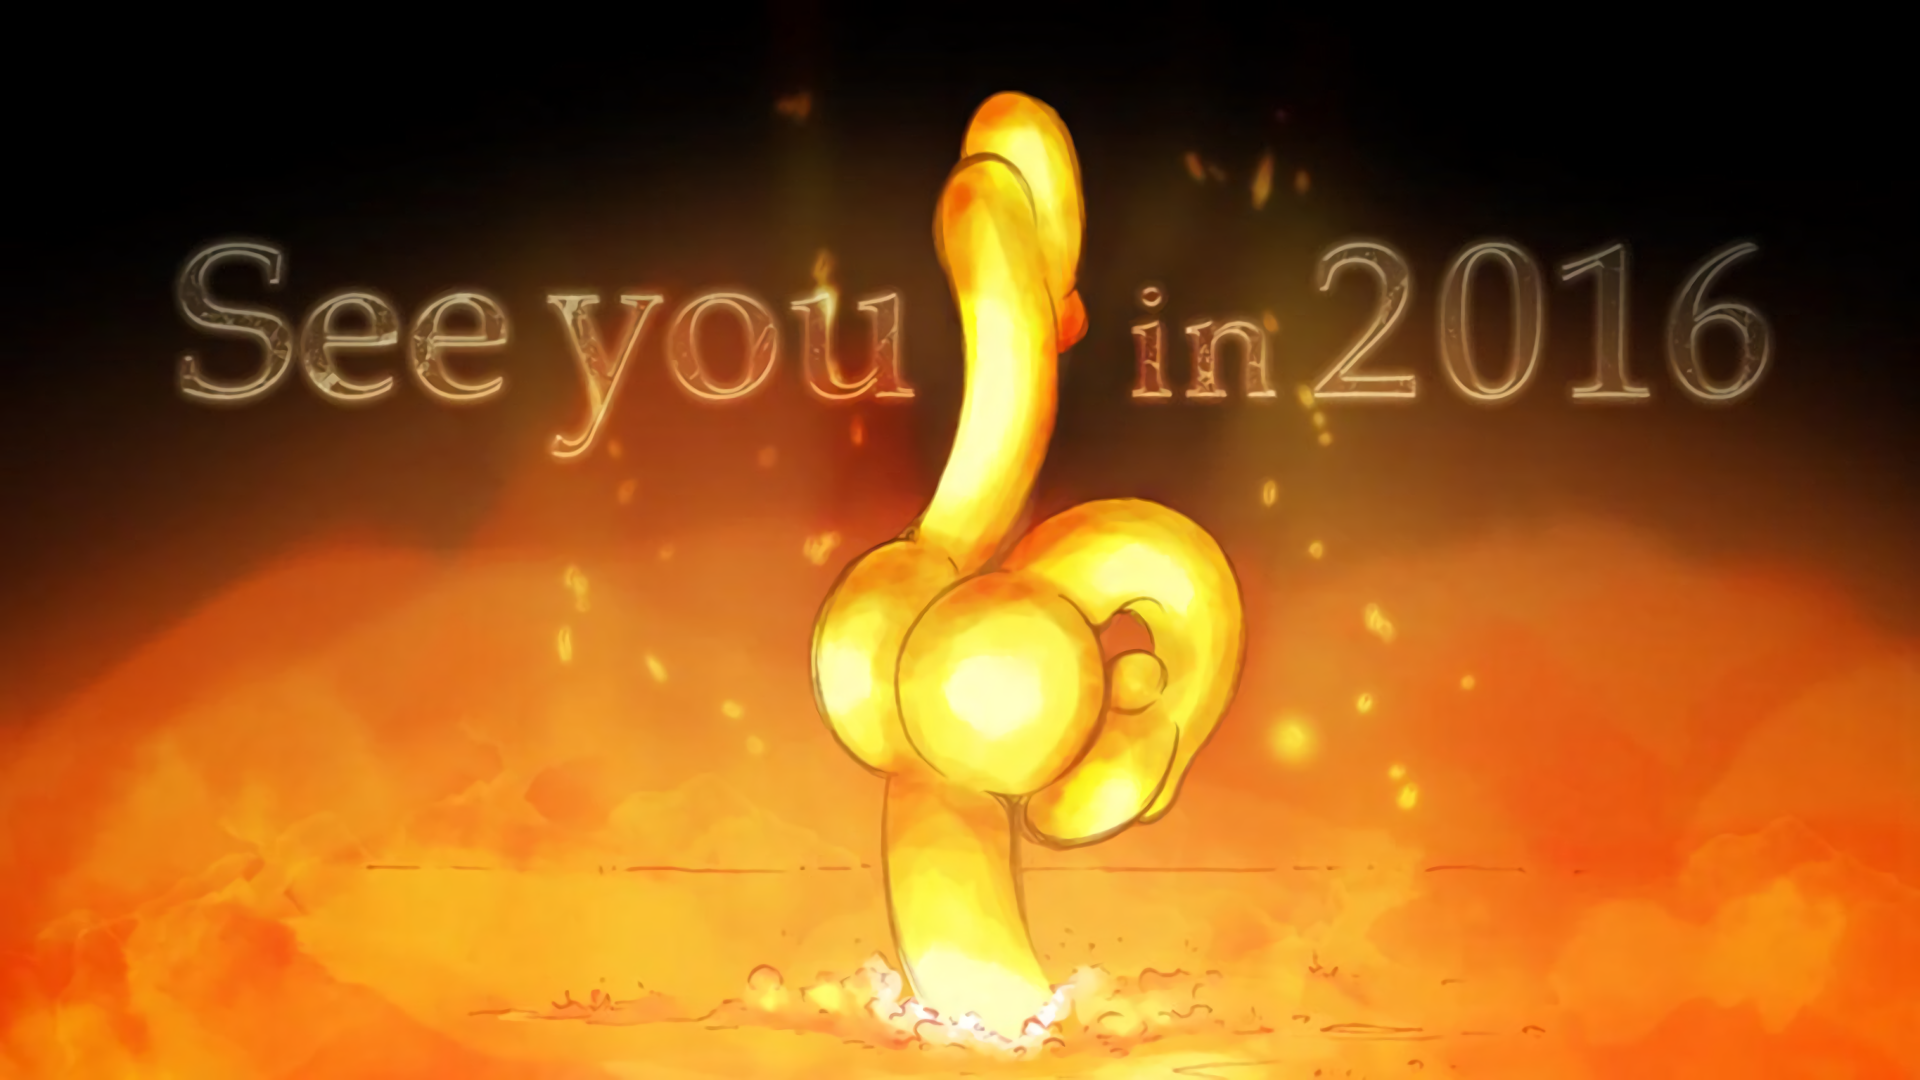 Assassination Classroom: See you in 2016 (Season 2) by drak95